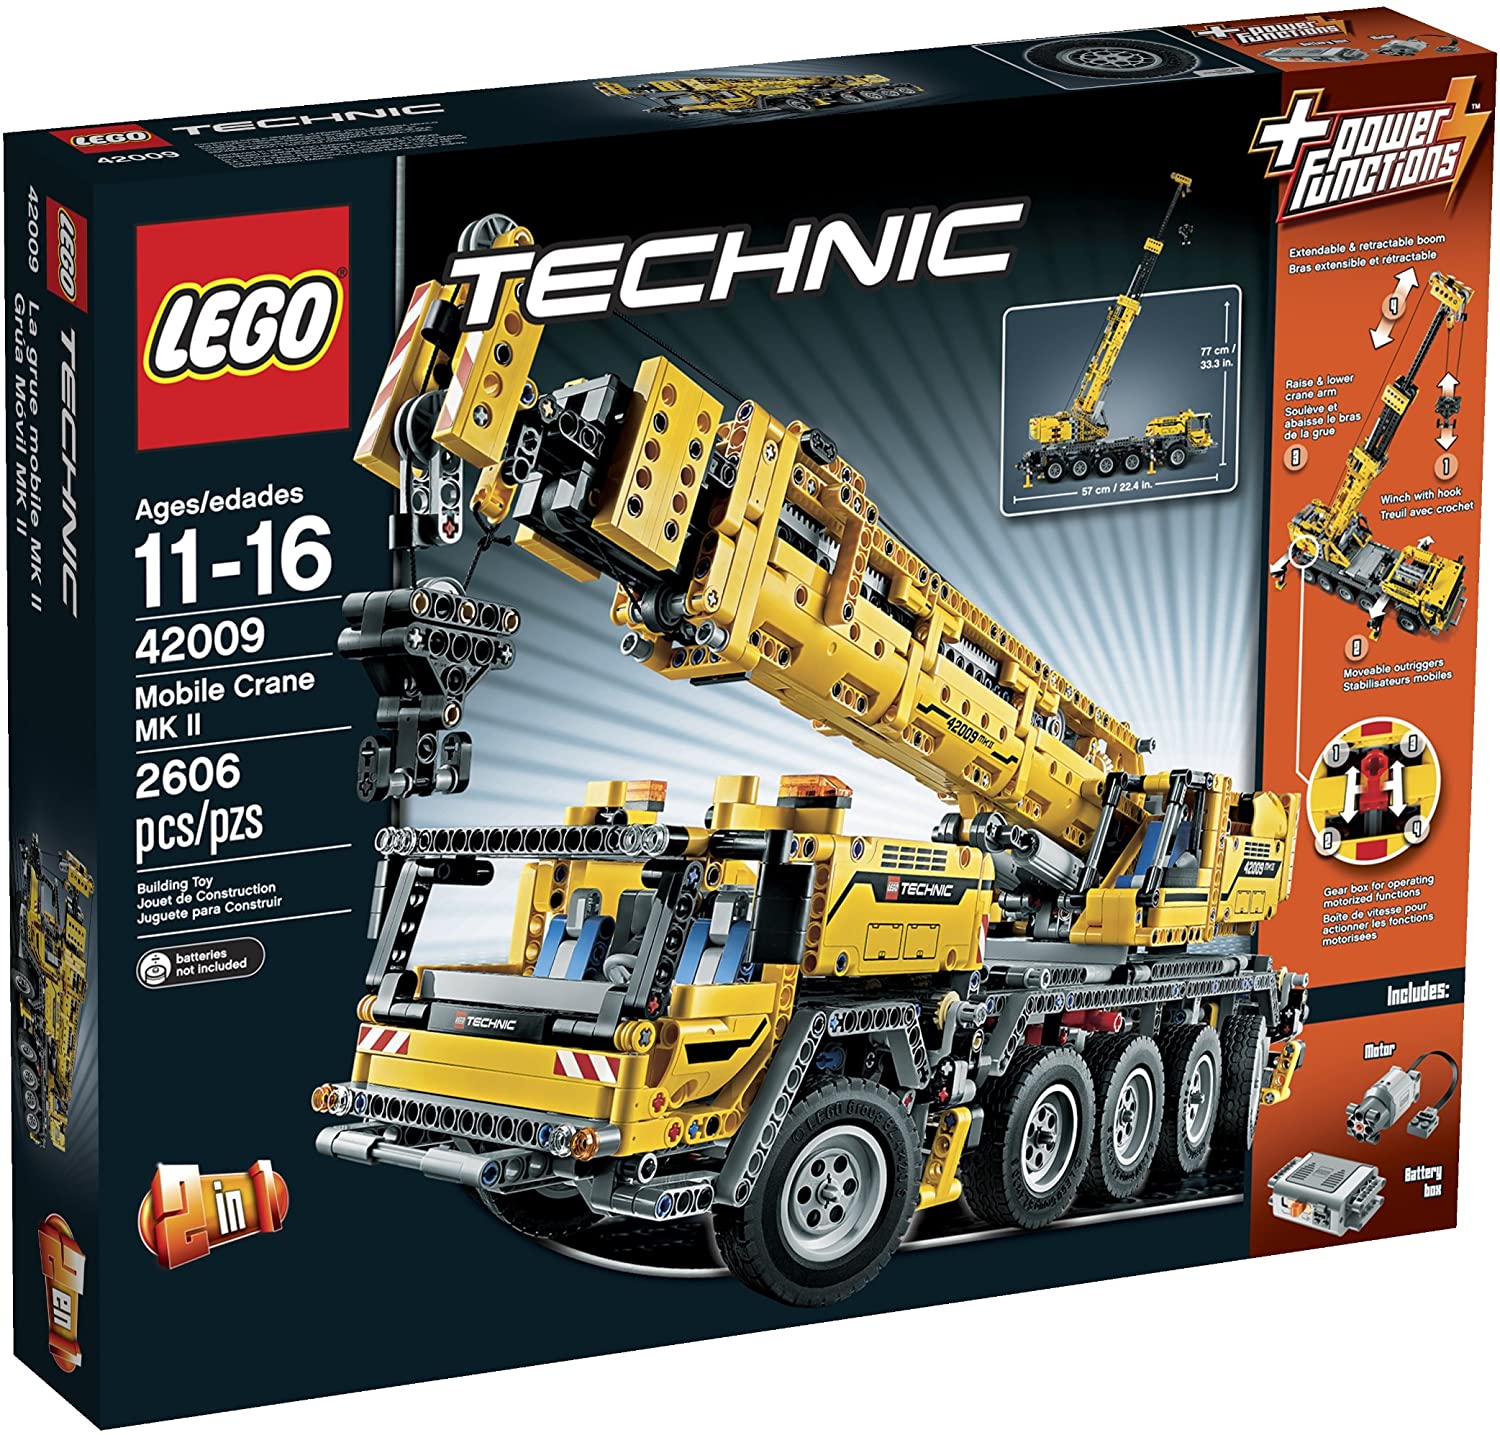 7 Best LEGO Crane Sets 2022 - Buying Guide & Reviews 2